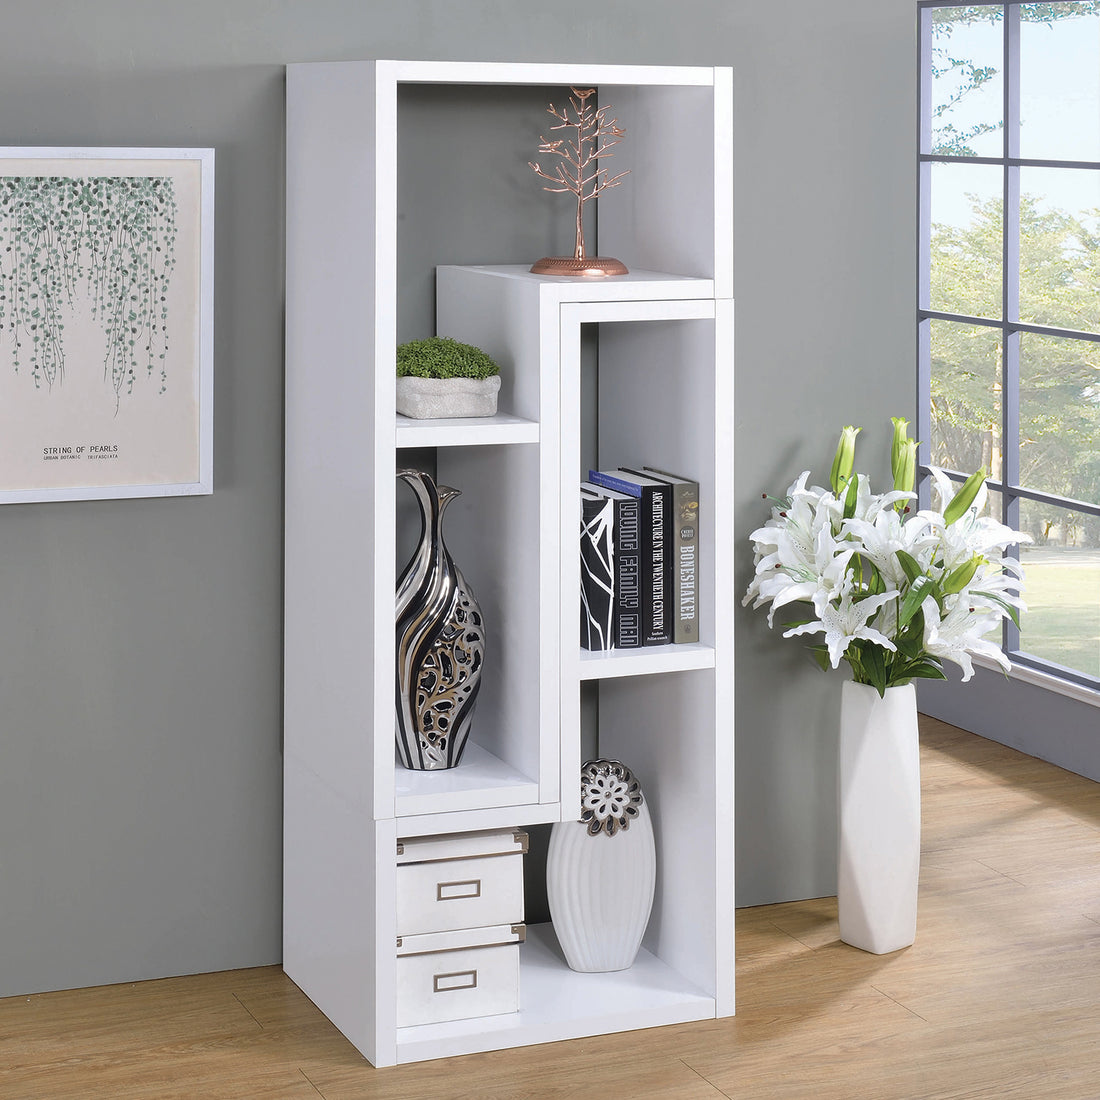 Convertible Tv Console And Bookcase in White